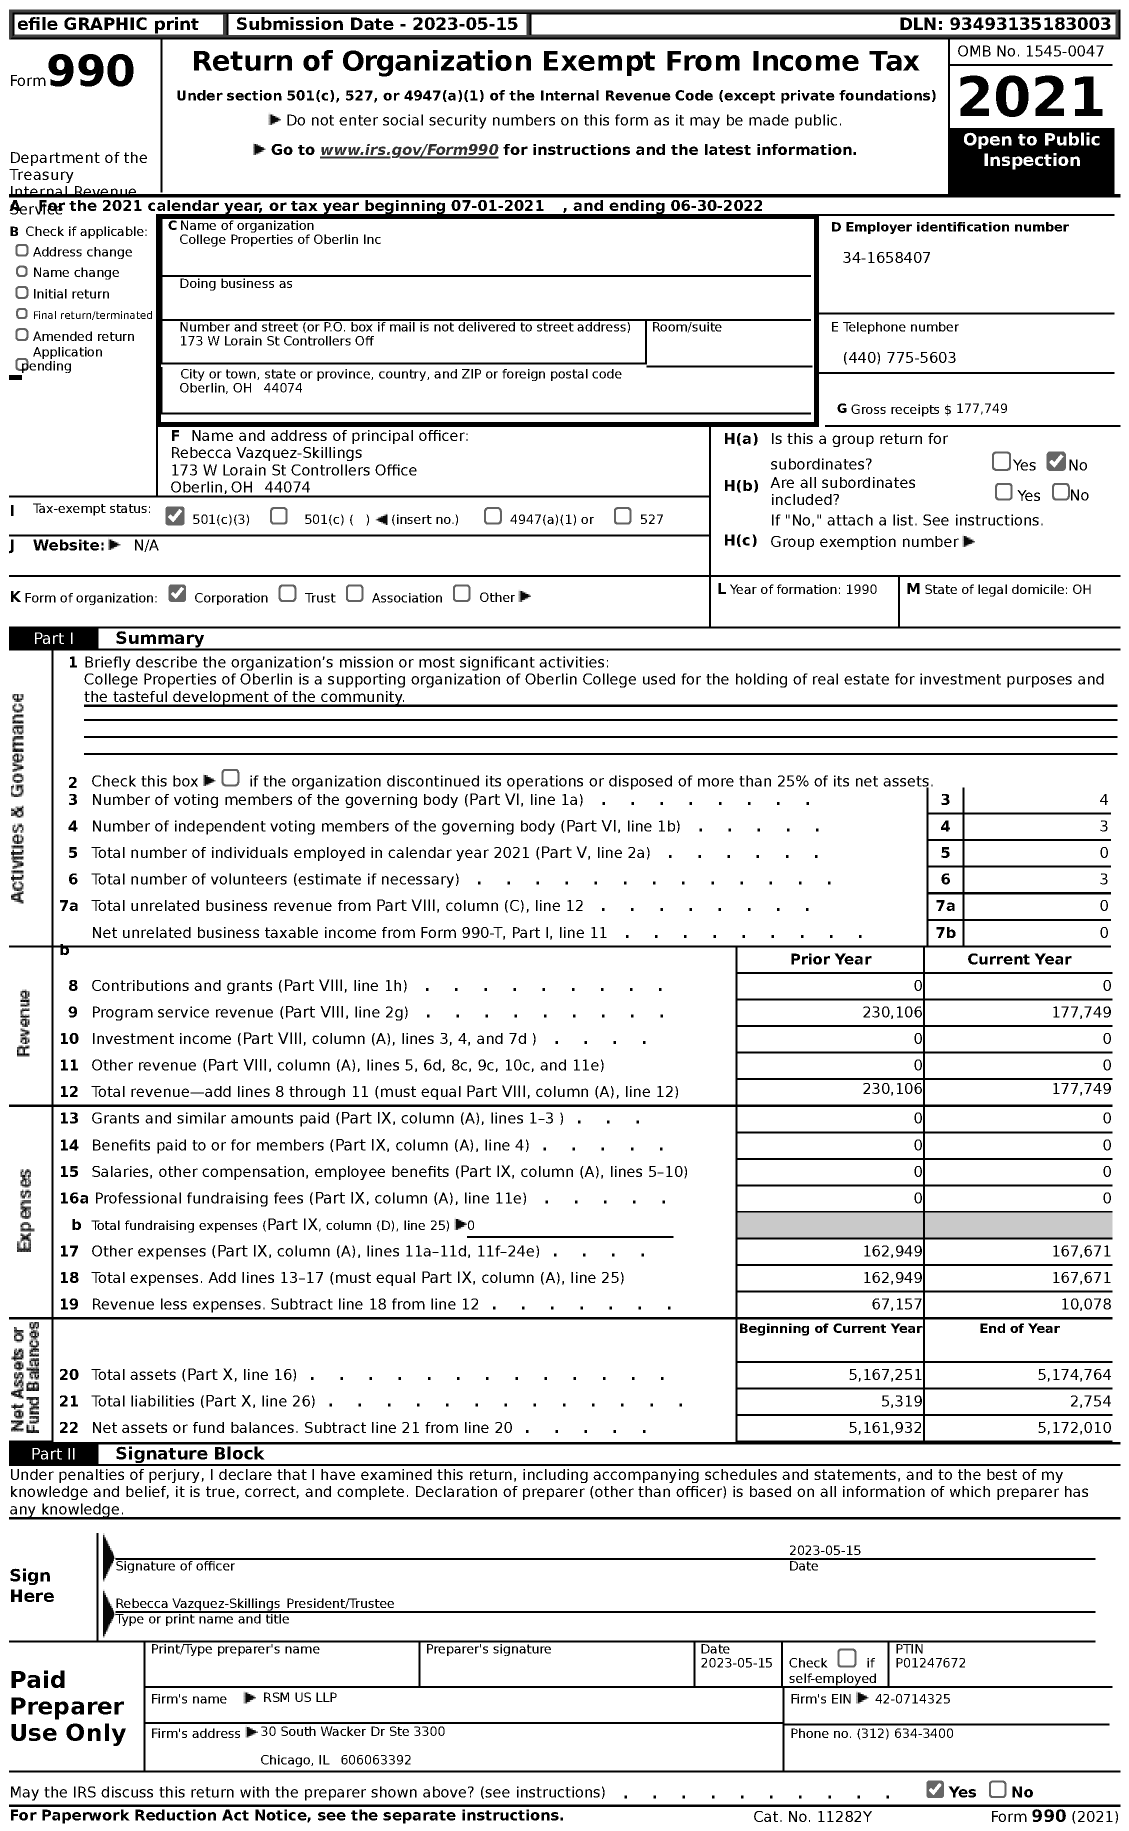 Image of first page of 2021 Form 990 for College Properties of Oberlin